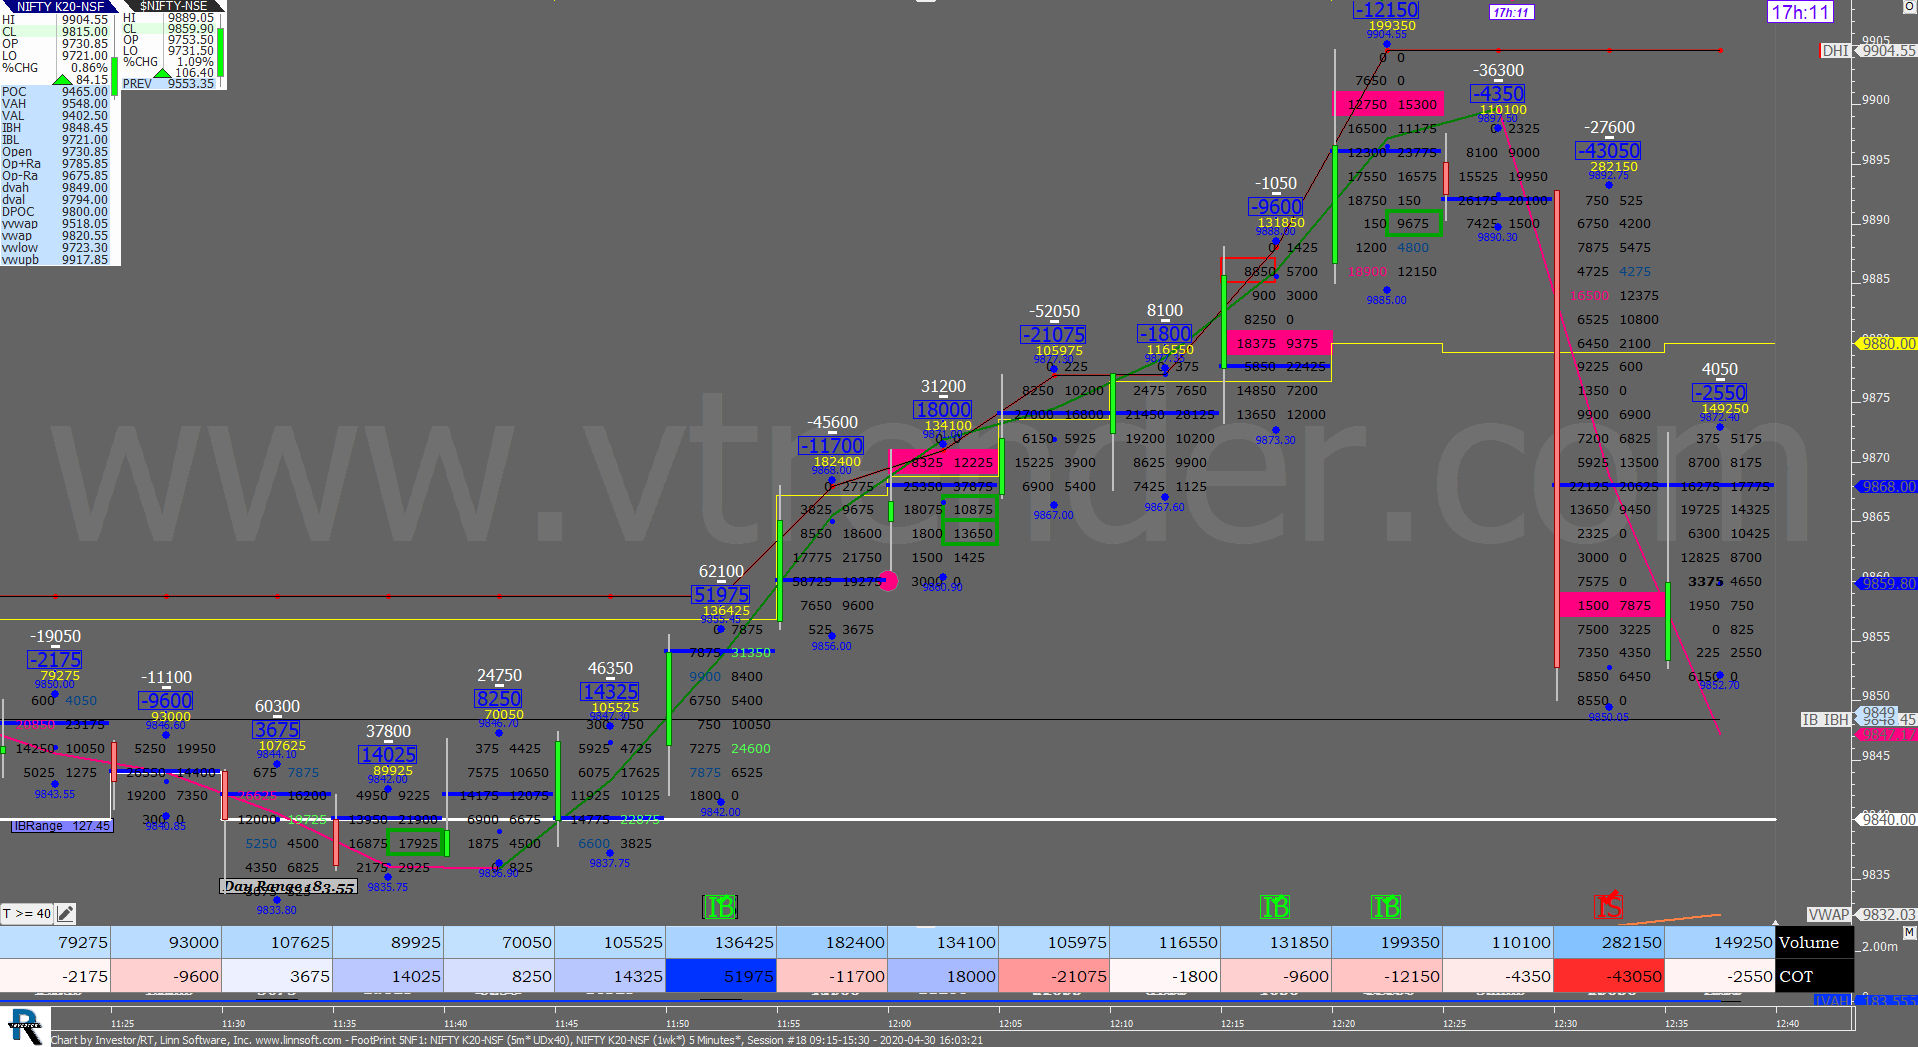 3 34 Order Flow Charts Dated 30Th Apr 2020 (5 Mins) Banknifty Futures, Day Trading, Intraday Trading, Intraday Trading Strategies, Nifty Futures, Order Flow Analysis, Support And Resistance, Trading Strategies, Volume Profile Trading